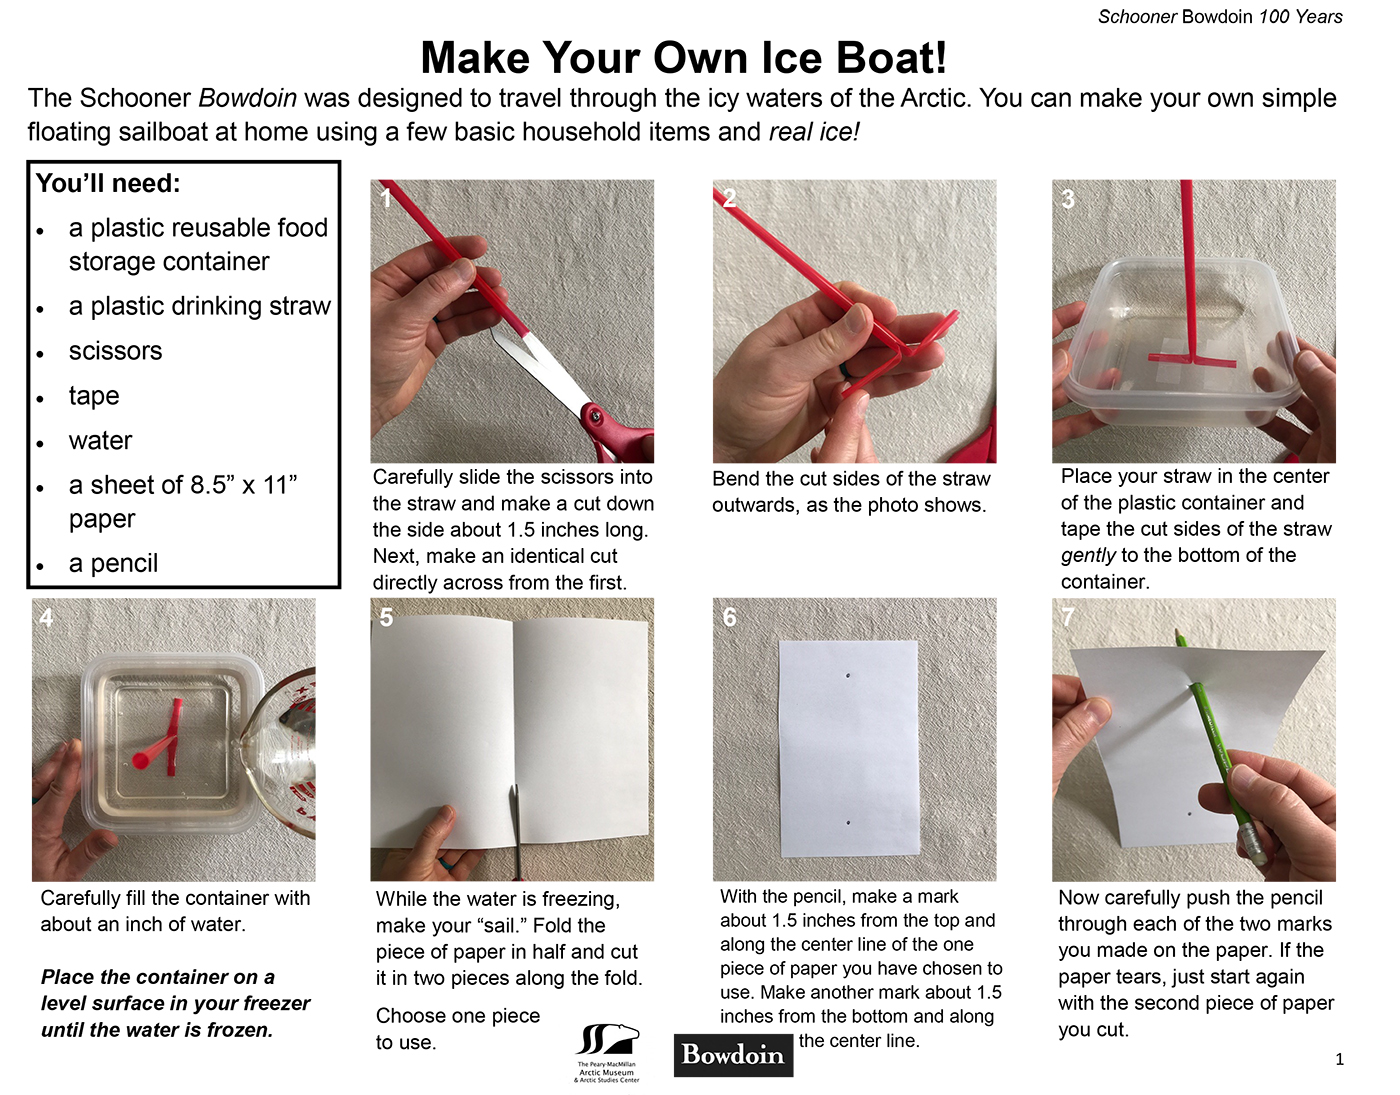 Directions to make an ice boat